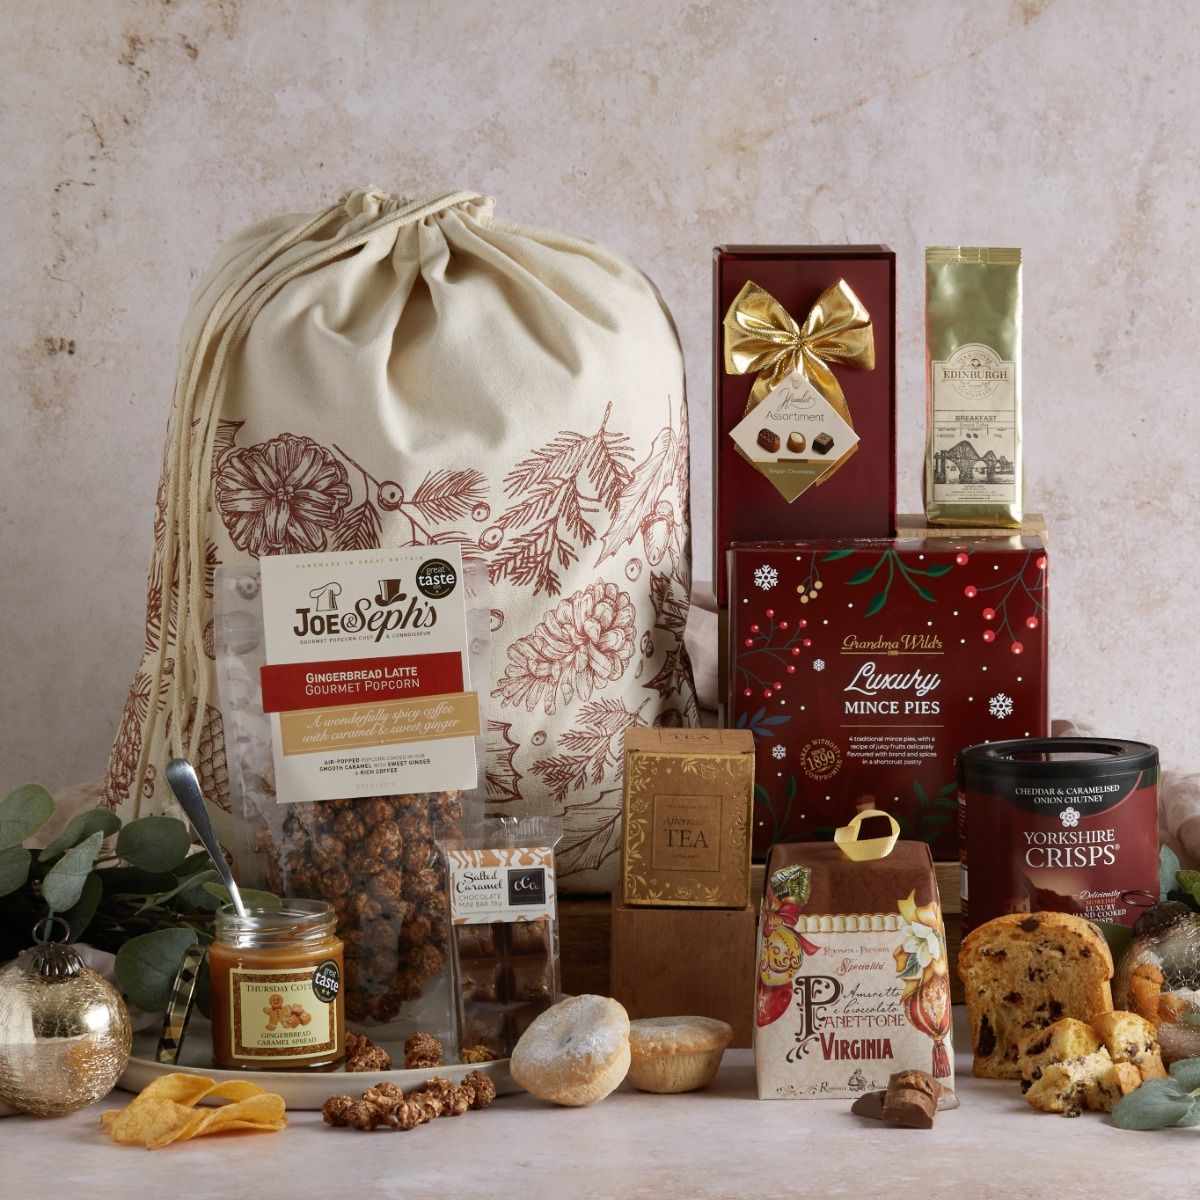 The Festive Favourites hampers contents on display, including a Christmas theme decorated gift bag sack